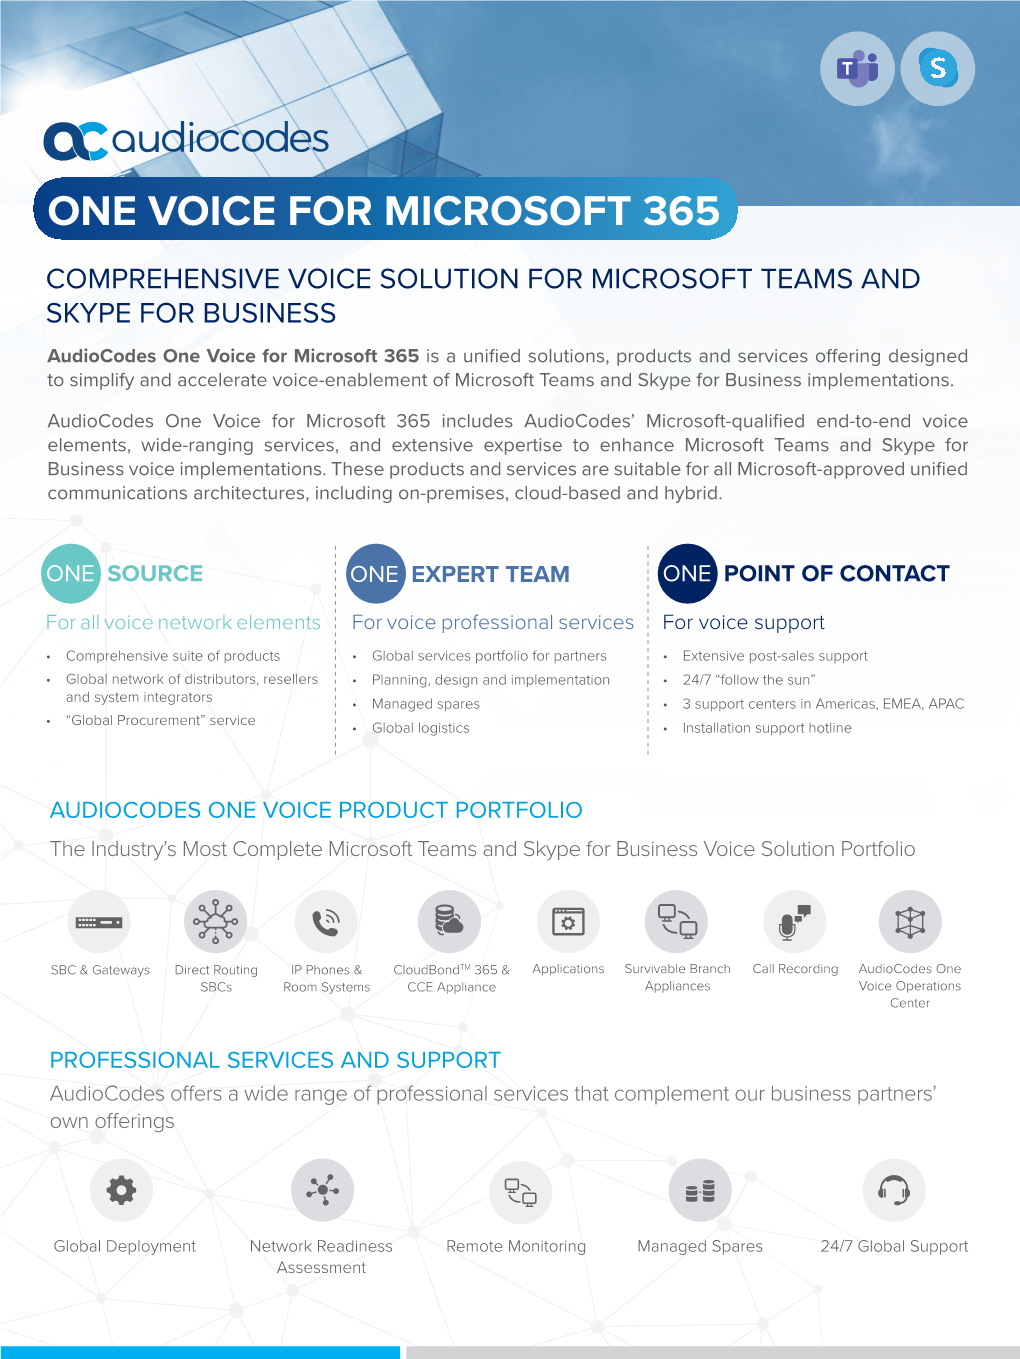 Audiocodes One Voice for Microsoft